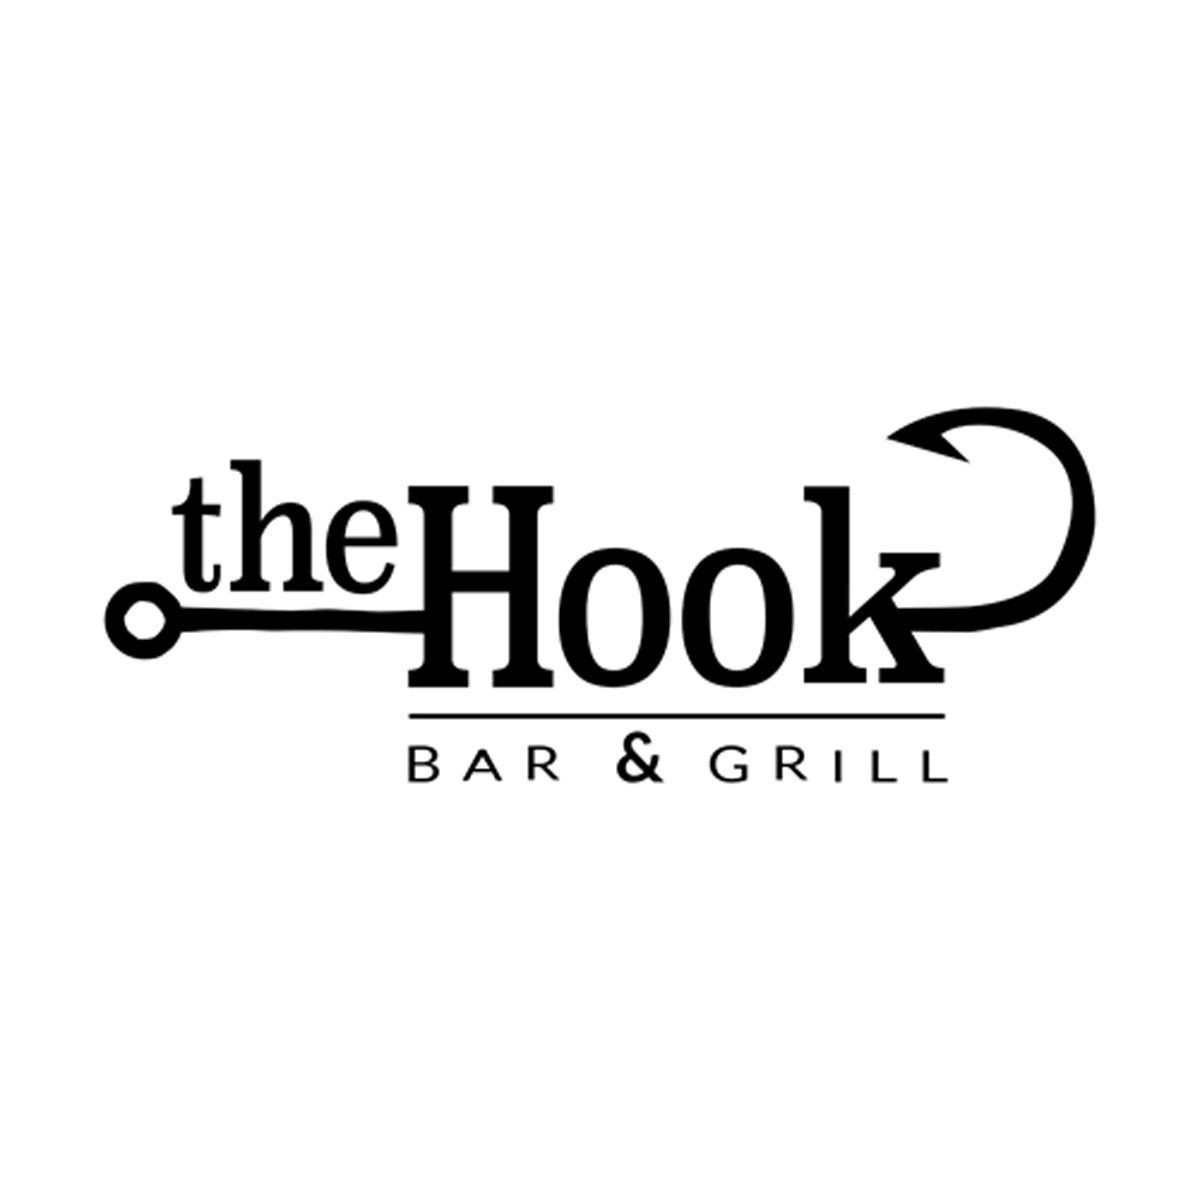 Restaurant Bar and Grill Logo - The Hook Bar and Grill Logo | ishCreatives | Creative Solutions for ...